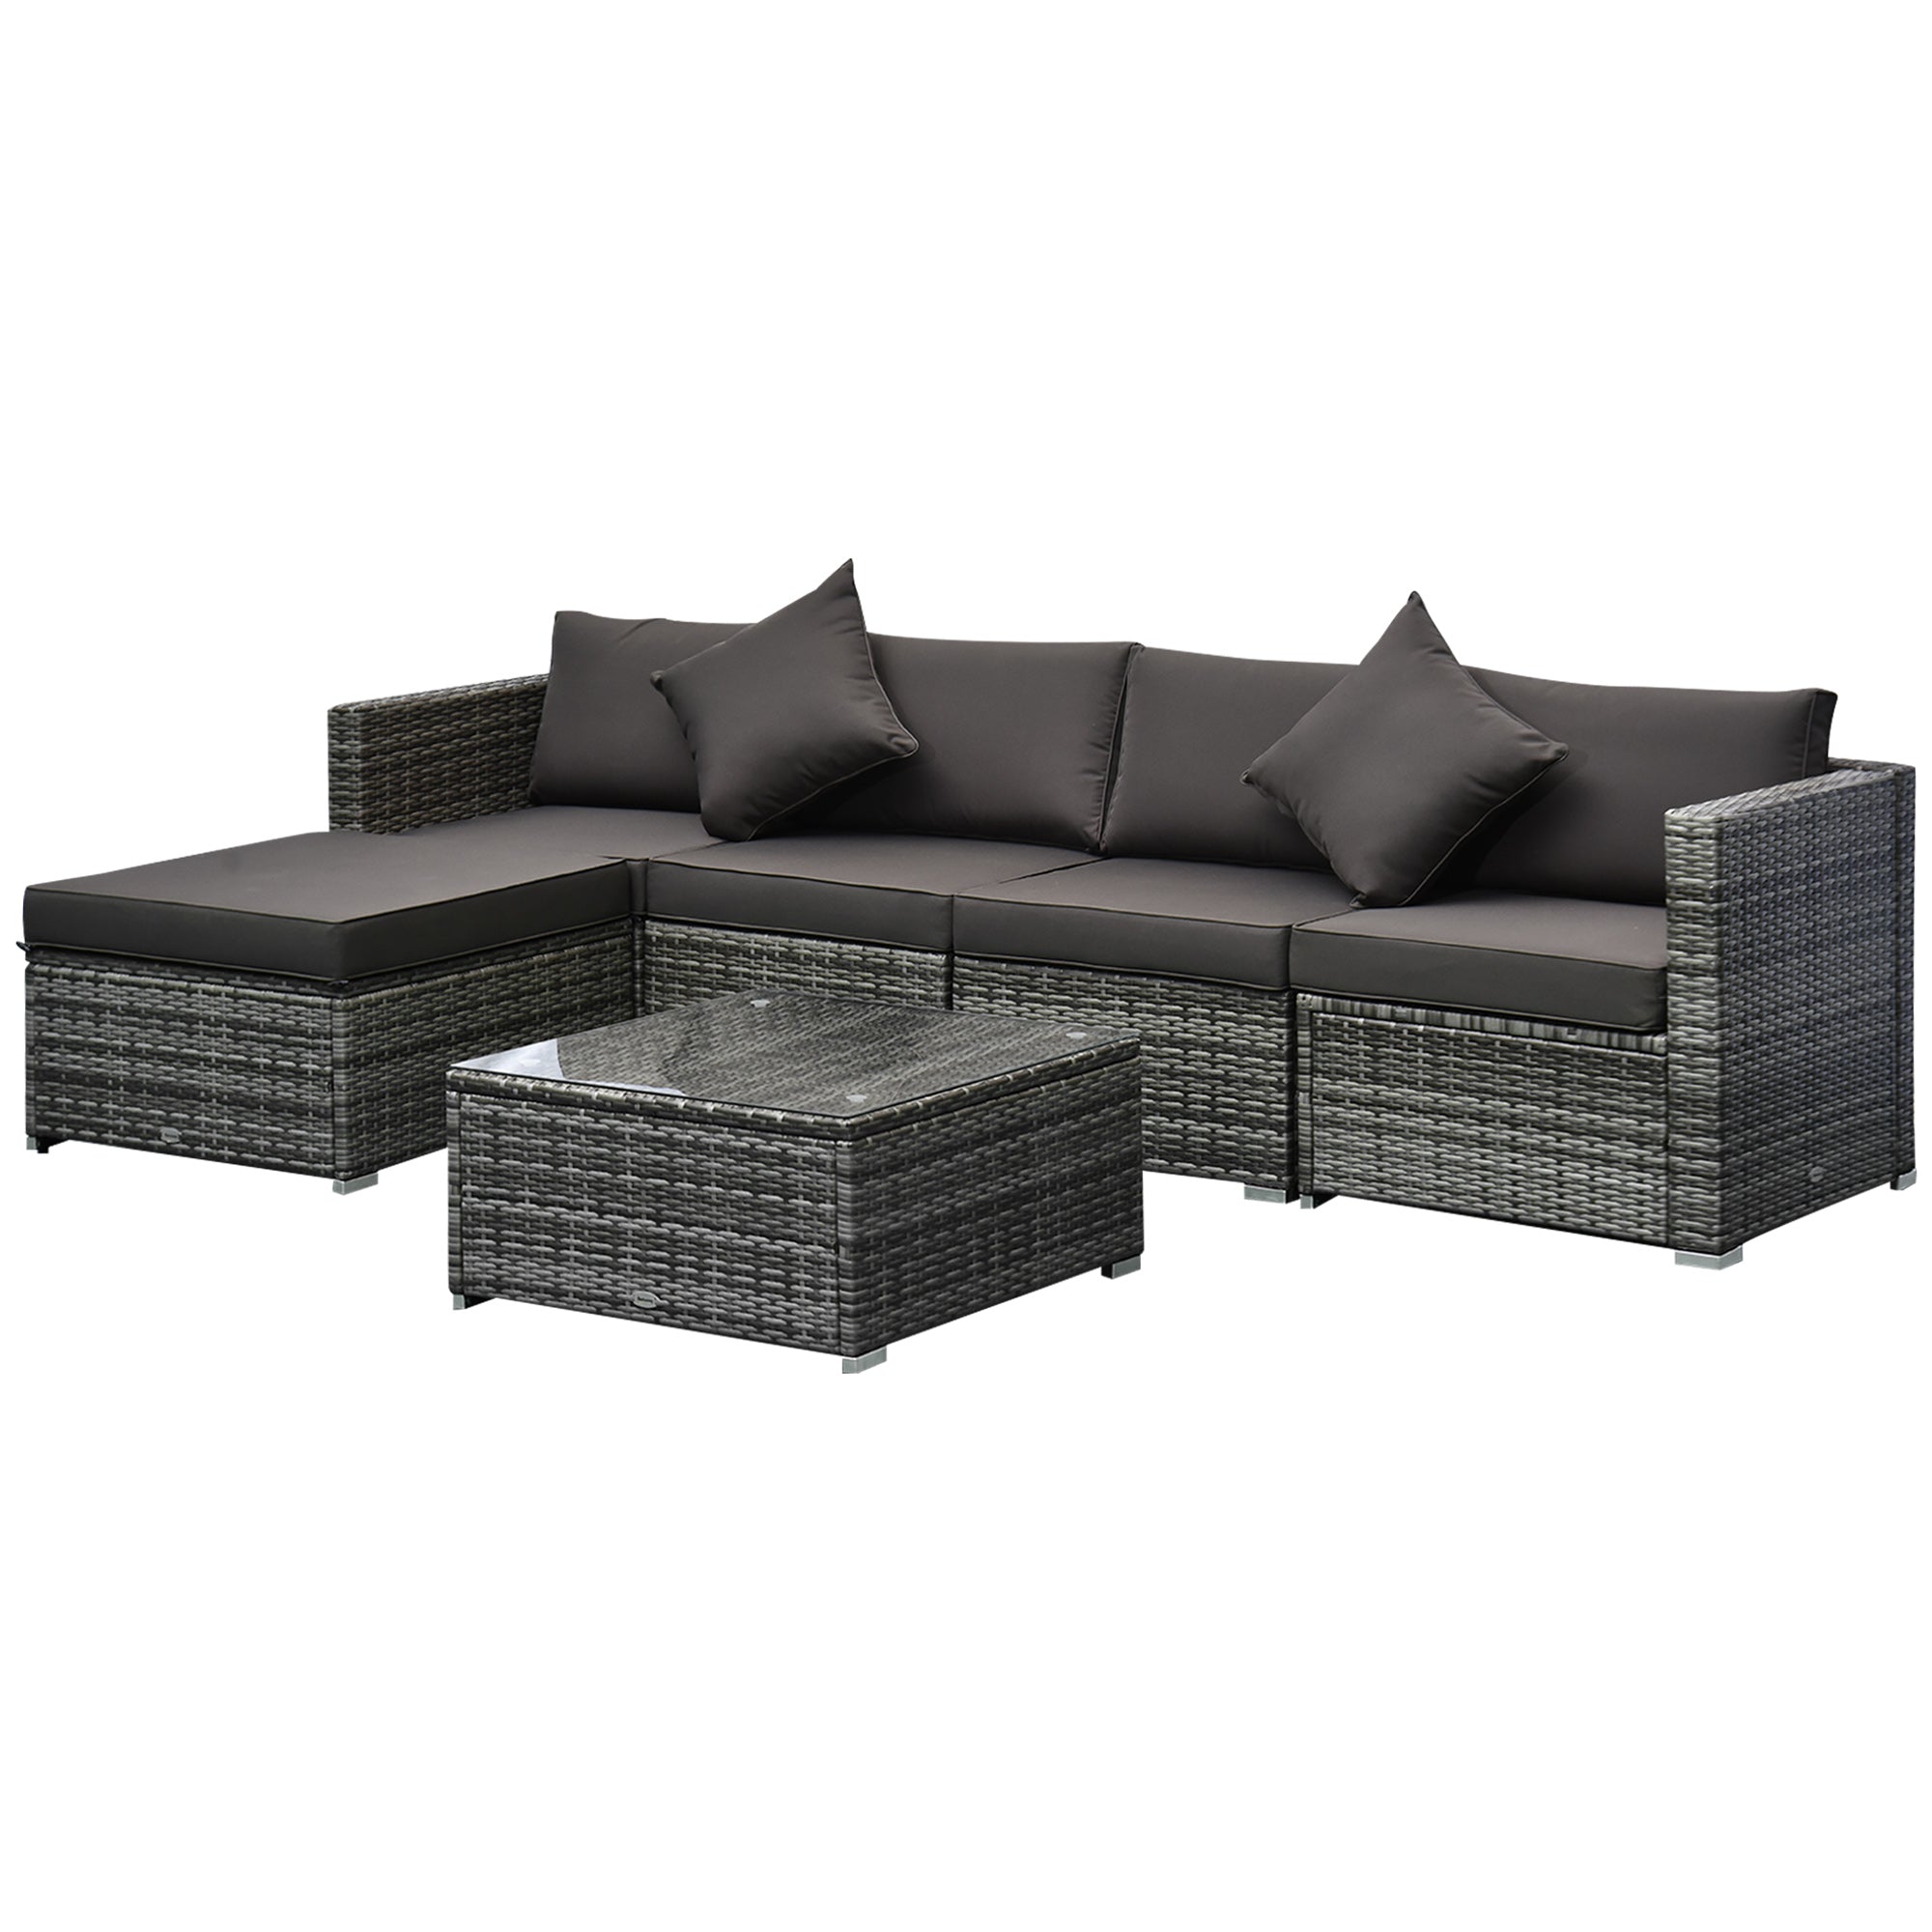 Outsunny 6 Pieces Outdoor Rattan Corner Sofa Set - Patio Aluminum Frame with All-weather Wicker Conversation Furniture w/ Coffee Table & Cushions - Mi